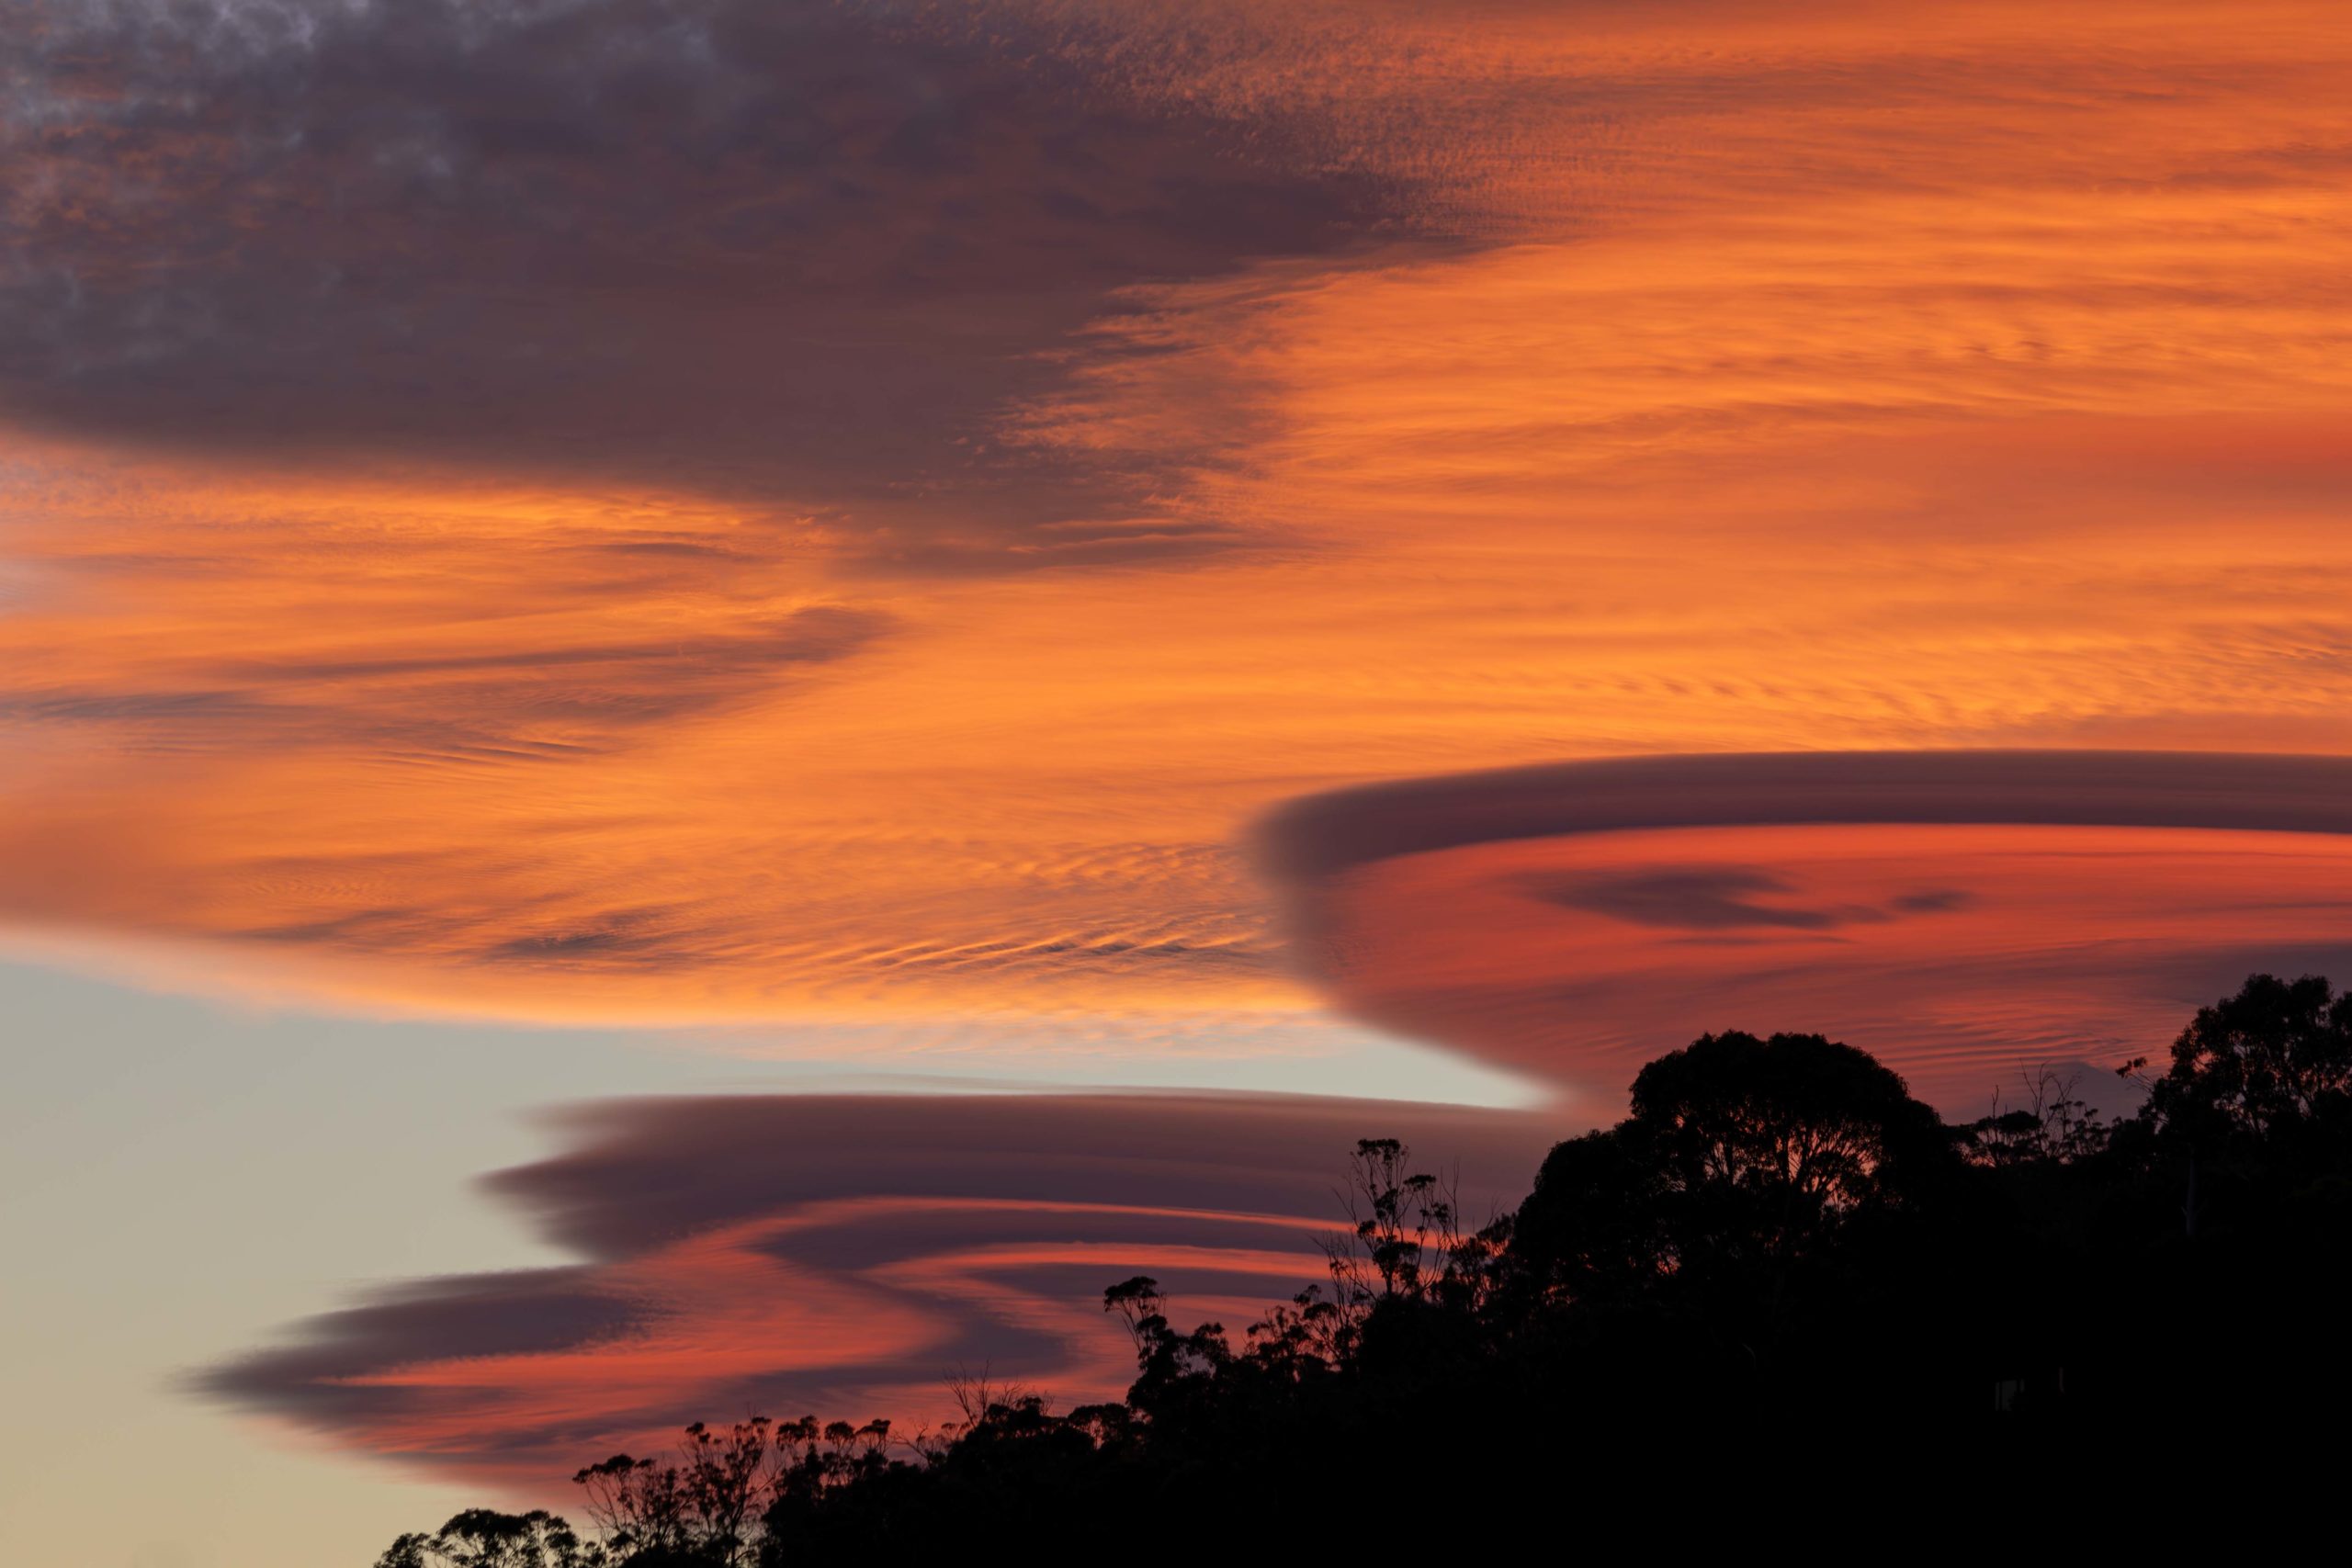 Rippled clouds resembling a pancake stack over a tree-lined hill at sunset